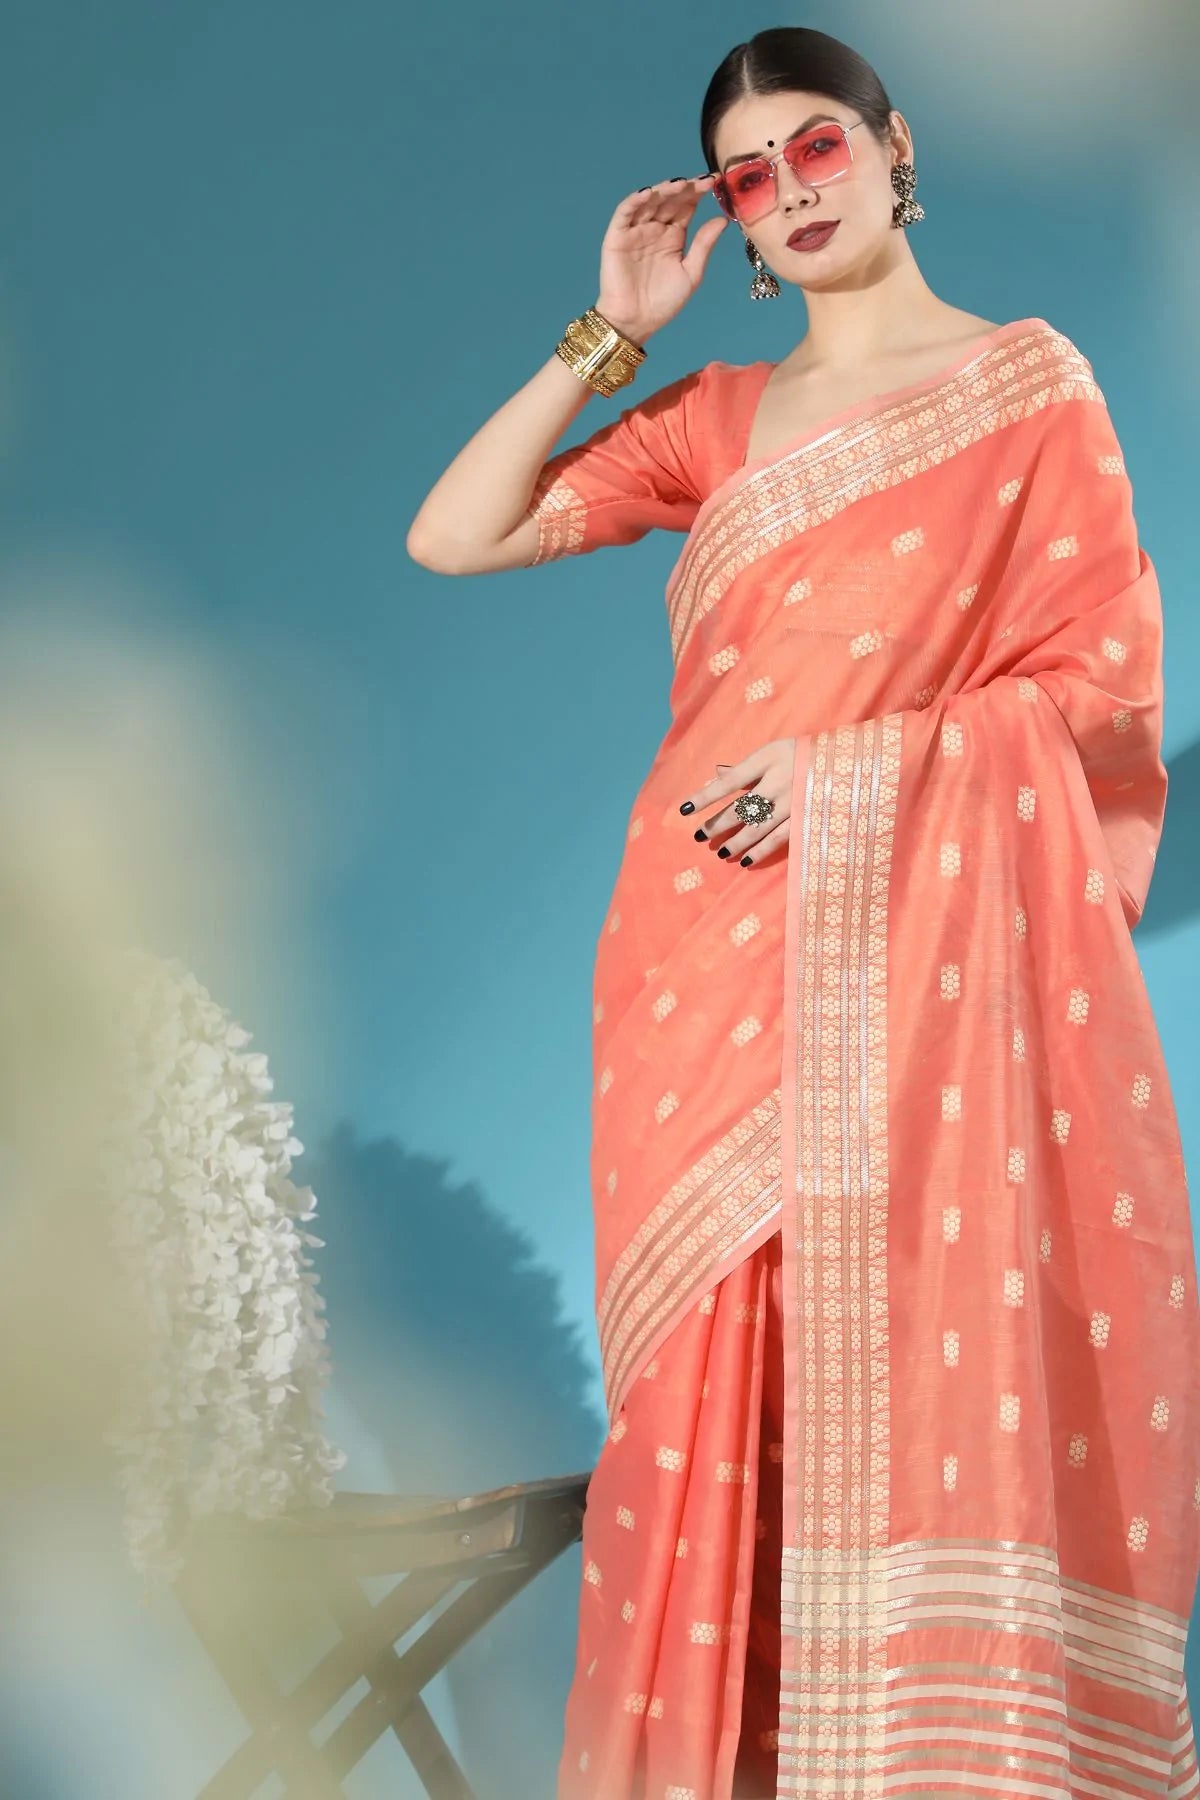 Buy MySilkLove Froly Pink Lucknowi Cotton Saree Online